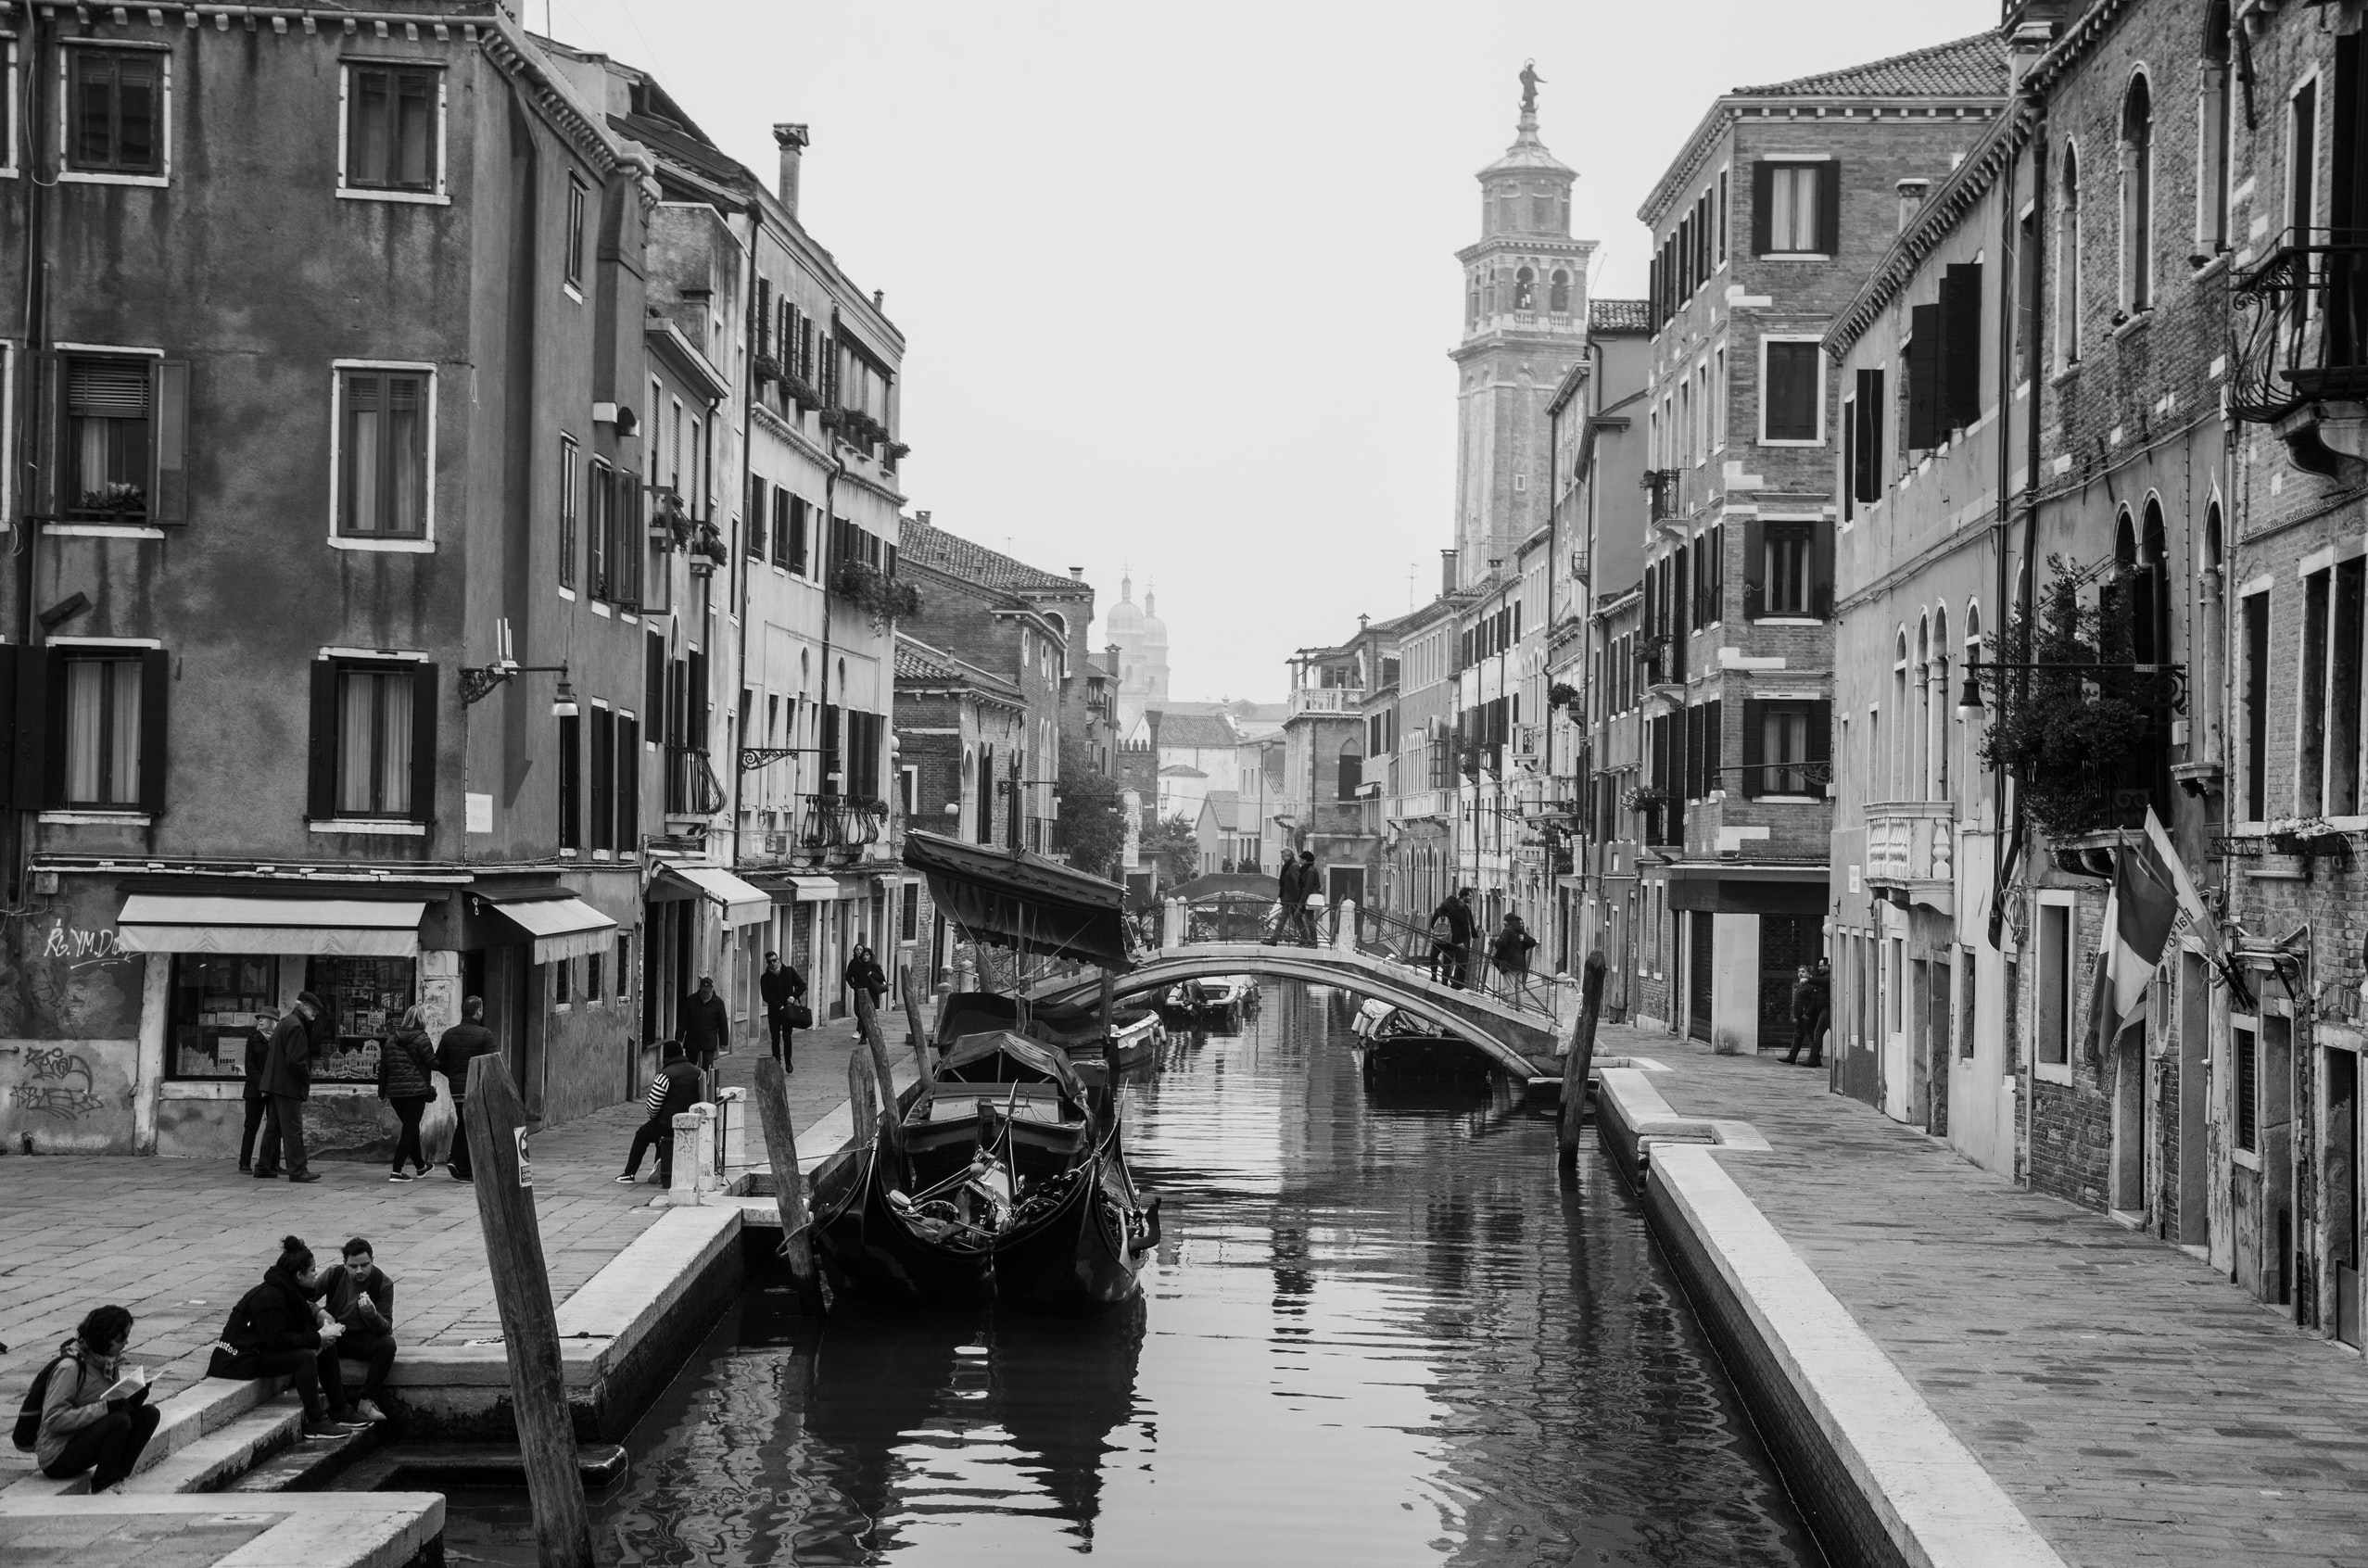 On eof the canal ways and streets on both sides in Venice